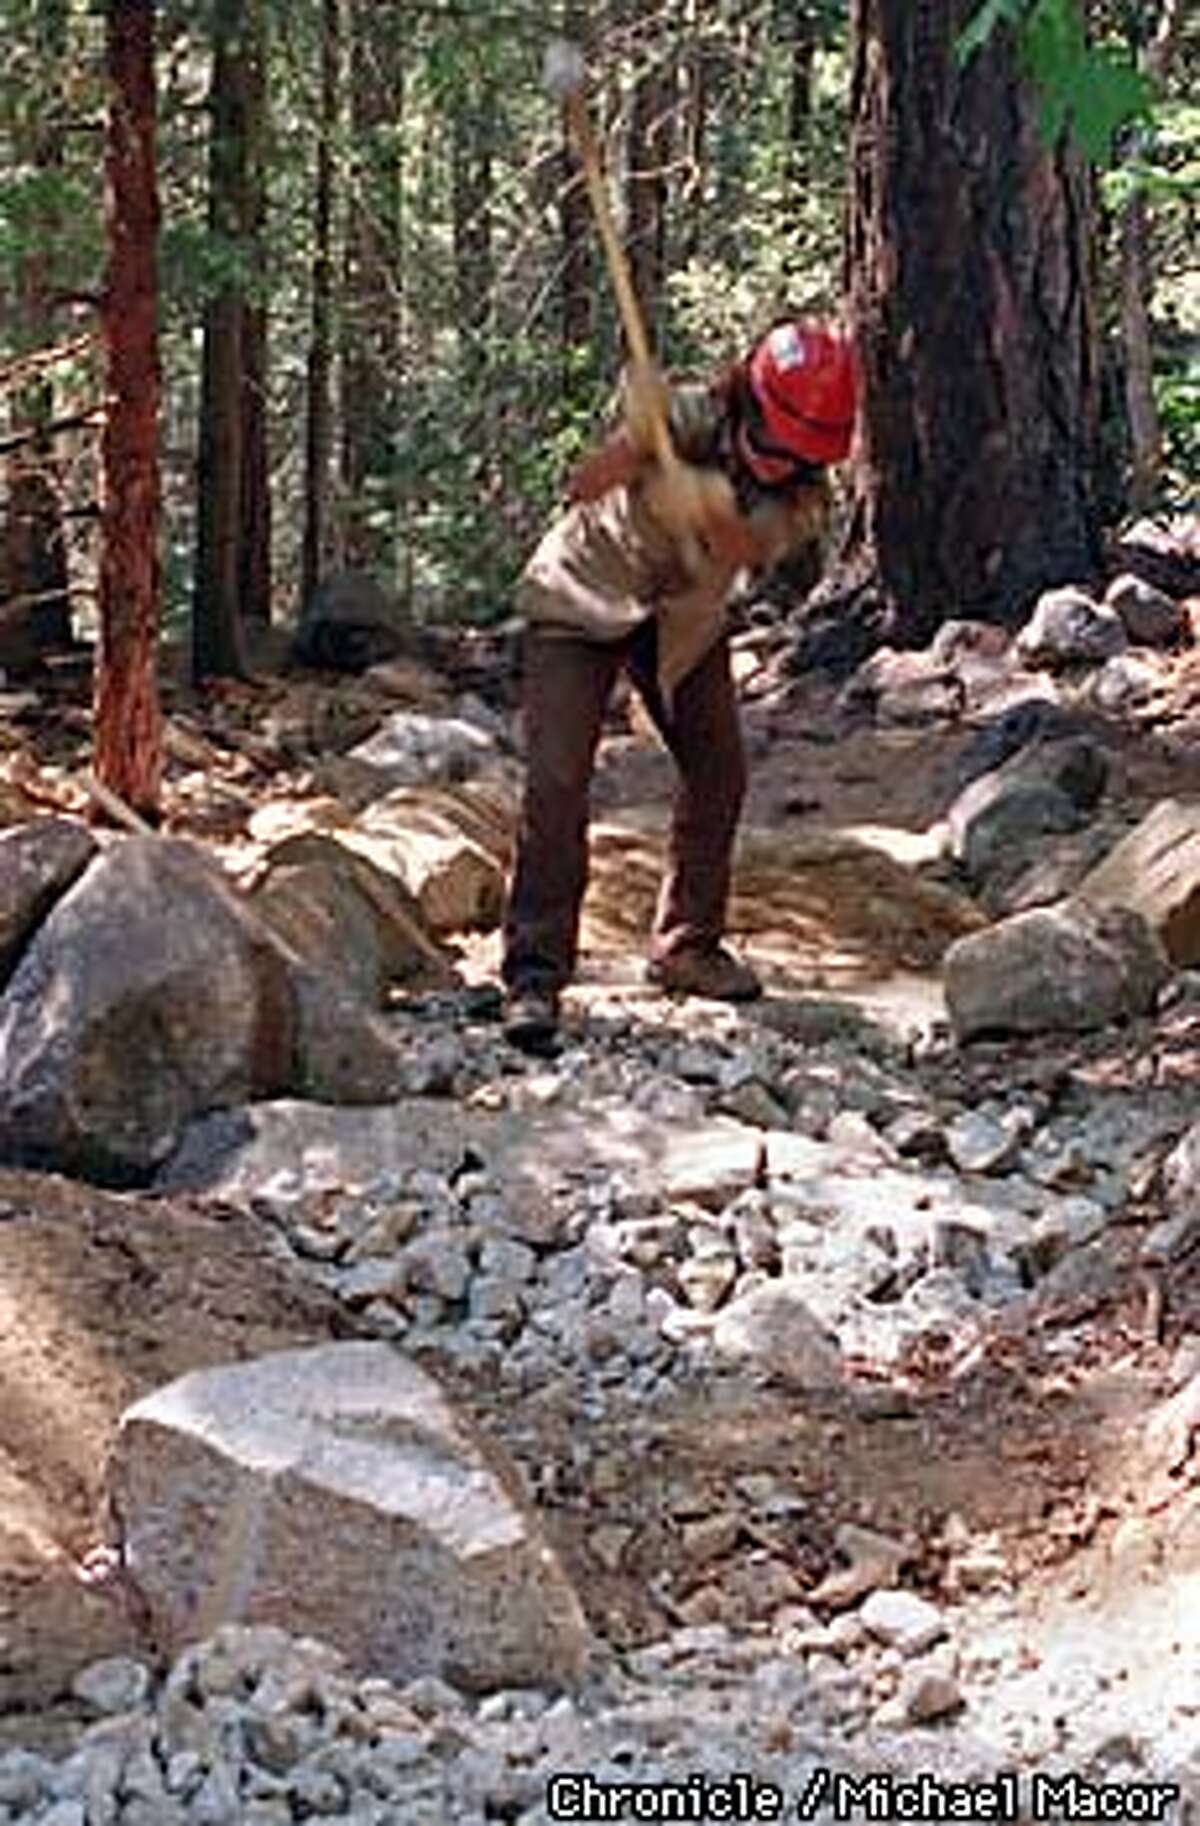 Yosemite National Park. Califronia Conservation Corp member crushes rock along the "MIST TRAIL" to repair damage to trail caused by January floods. The popular trail leads to Nevada Falls. Chronicle Photo: Michael Macor